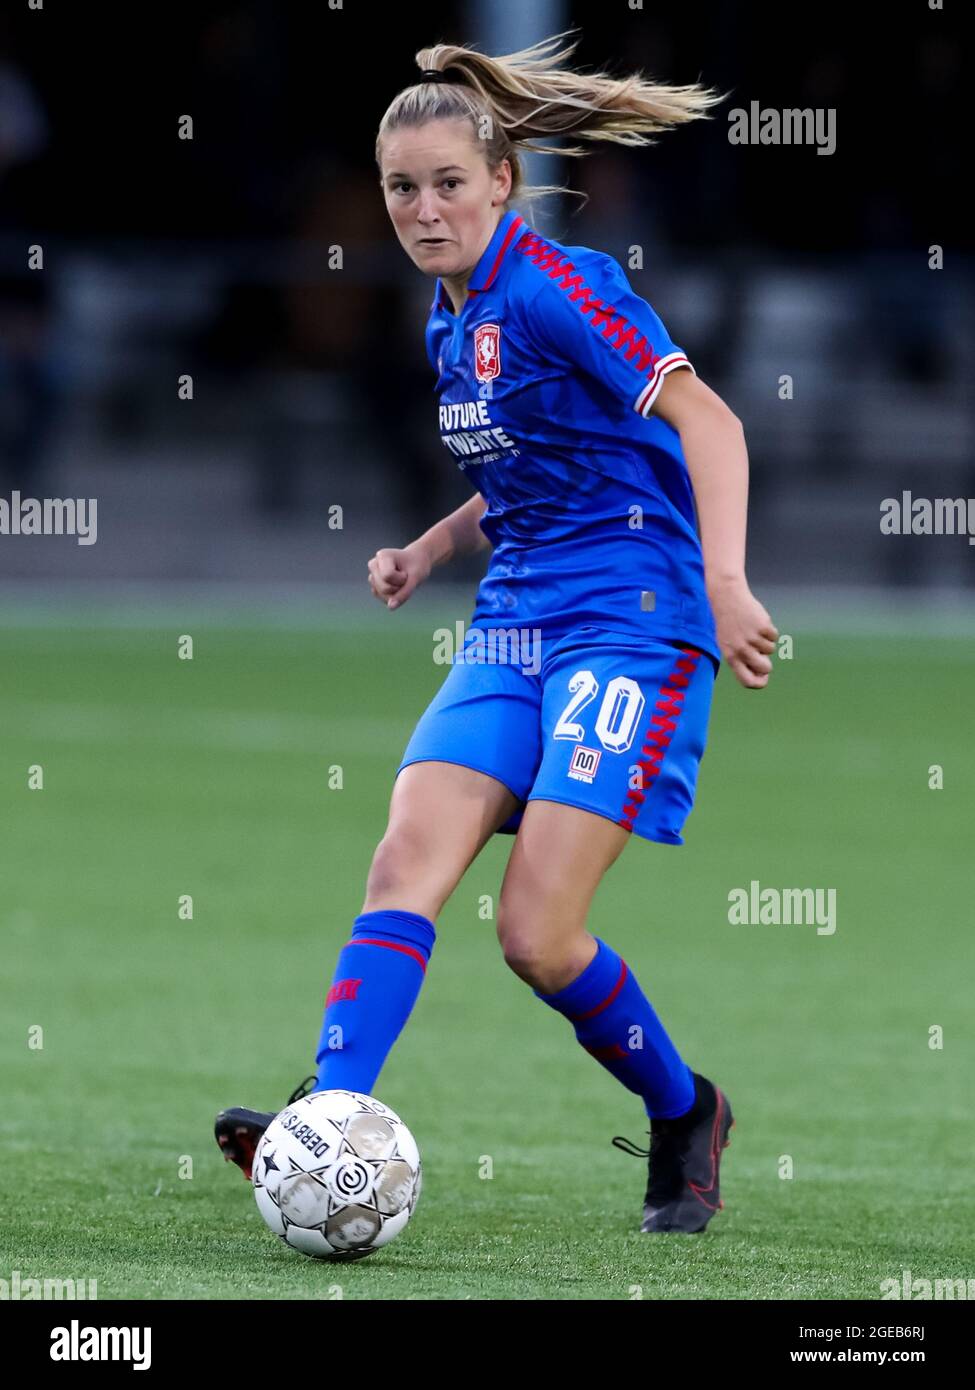 Indringing opstelling Stal ENSCHEDE, NETHERLANDS - AUGUST 18: Wieke Kaptein of FC Twente during the  UEFA Women's Champions League First Qualifying Round match between FC Twente  and FC Nike at Sportclub Enschede on August 18,